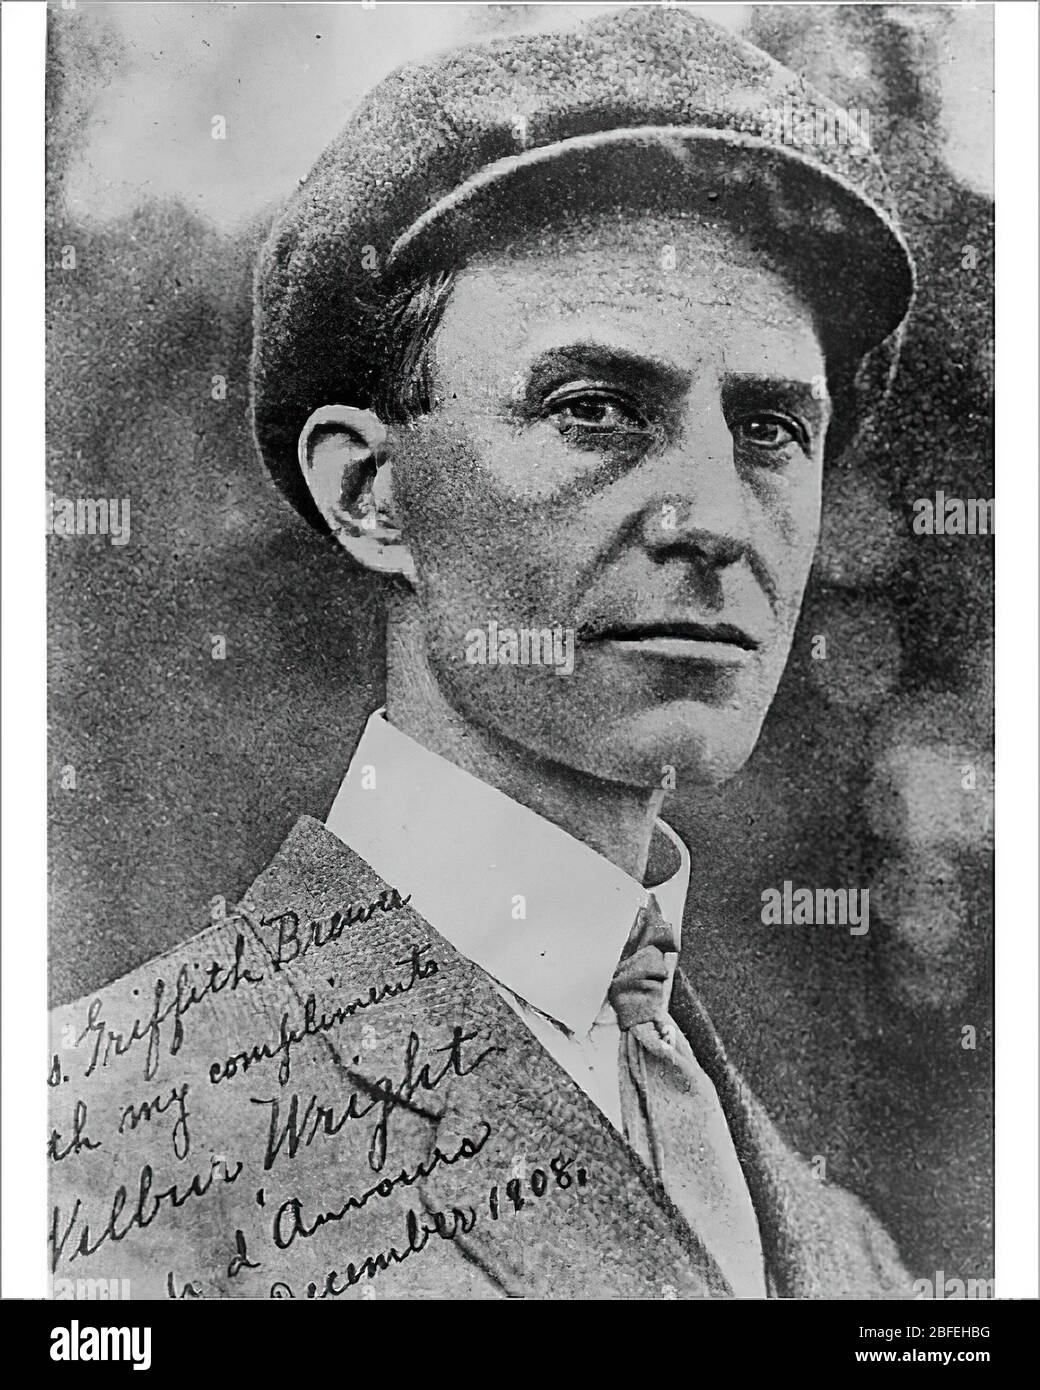 Wilbur Wright in December 1908On December 17, 1903, the Wright Brothers made the very first flight of an airplane at Kitty Hawk, North Carolina with their history-making Flyer. Stock Photo